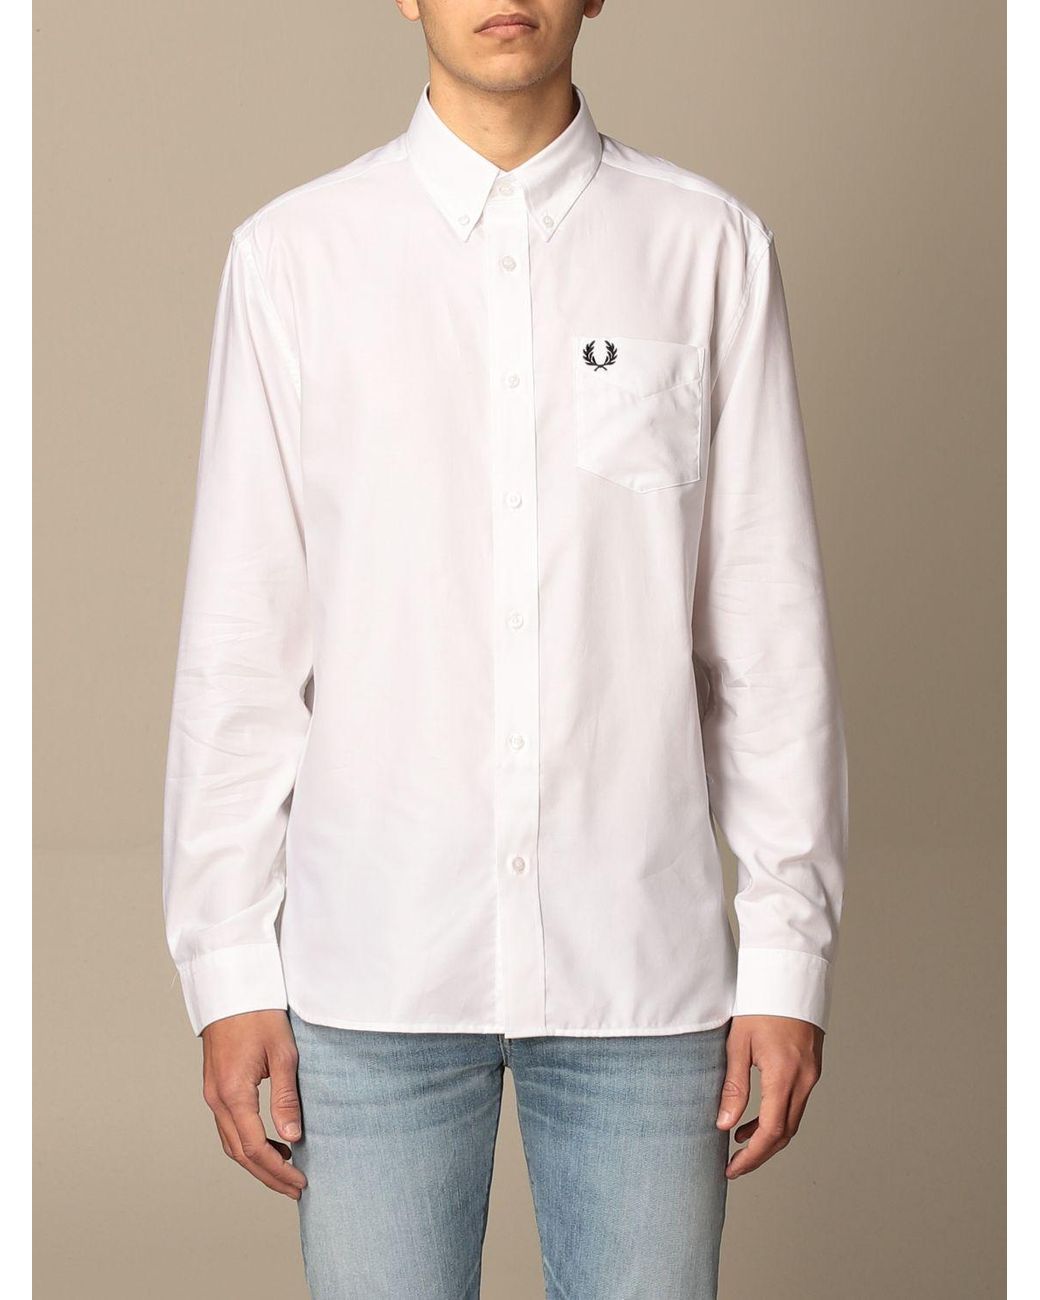 Fred Perry Shirt for Men - Lyst